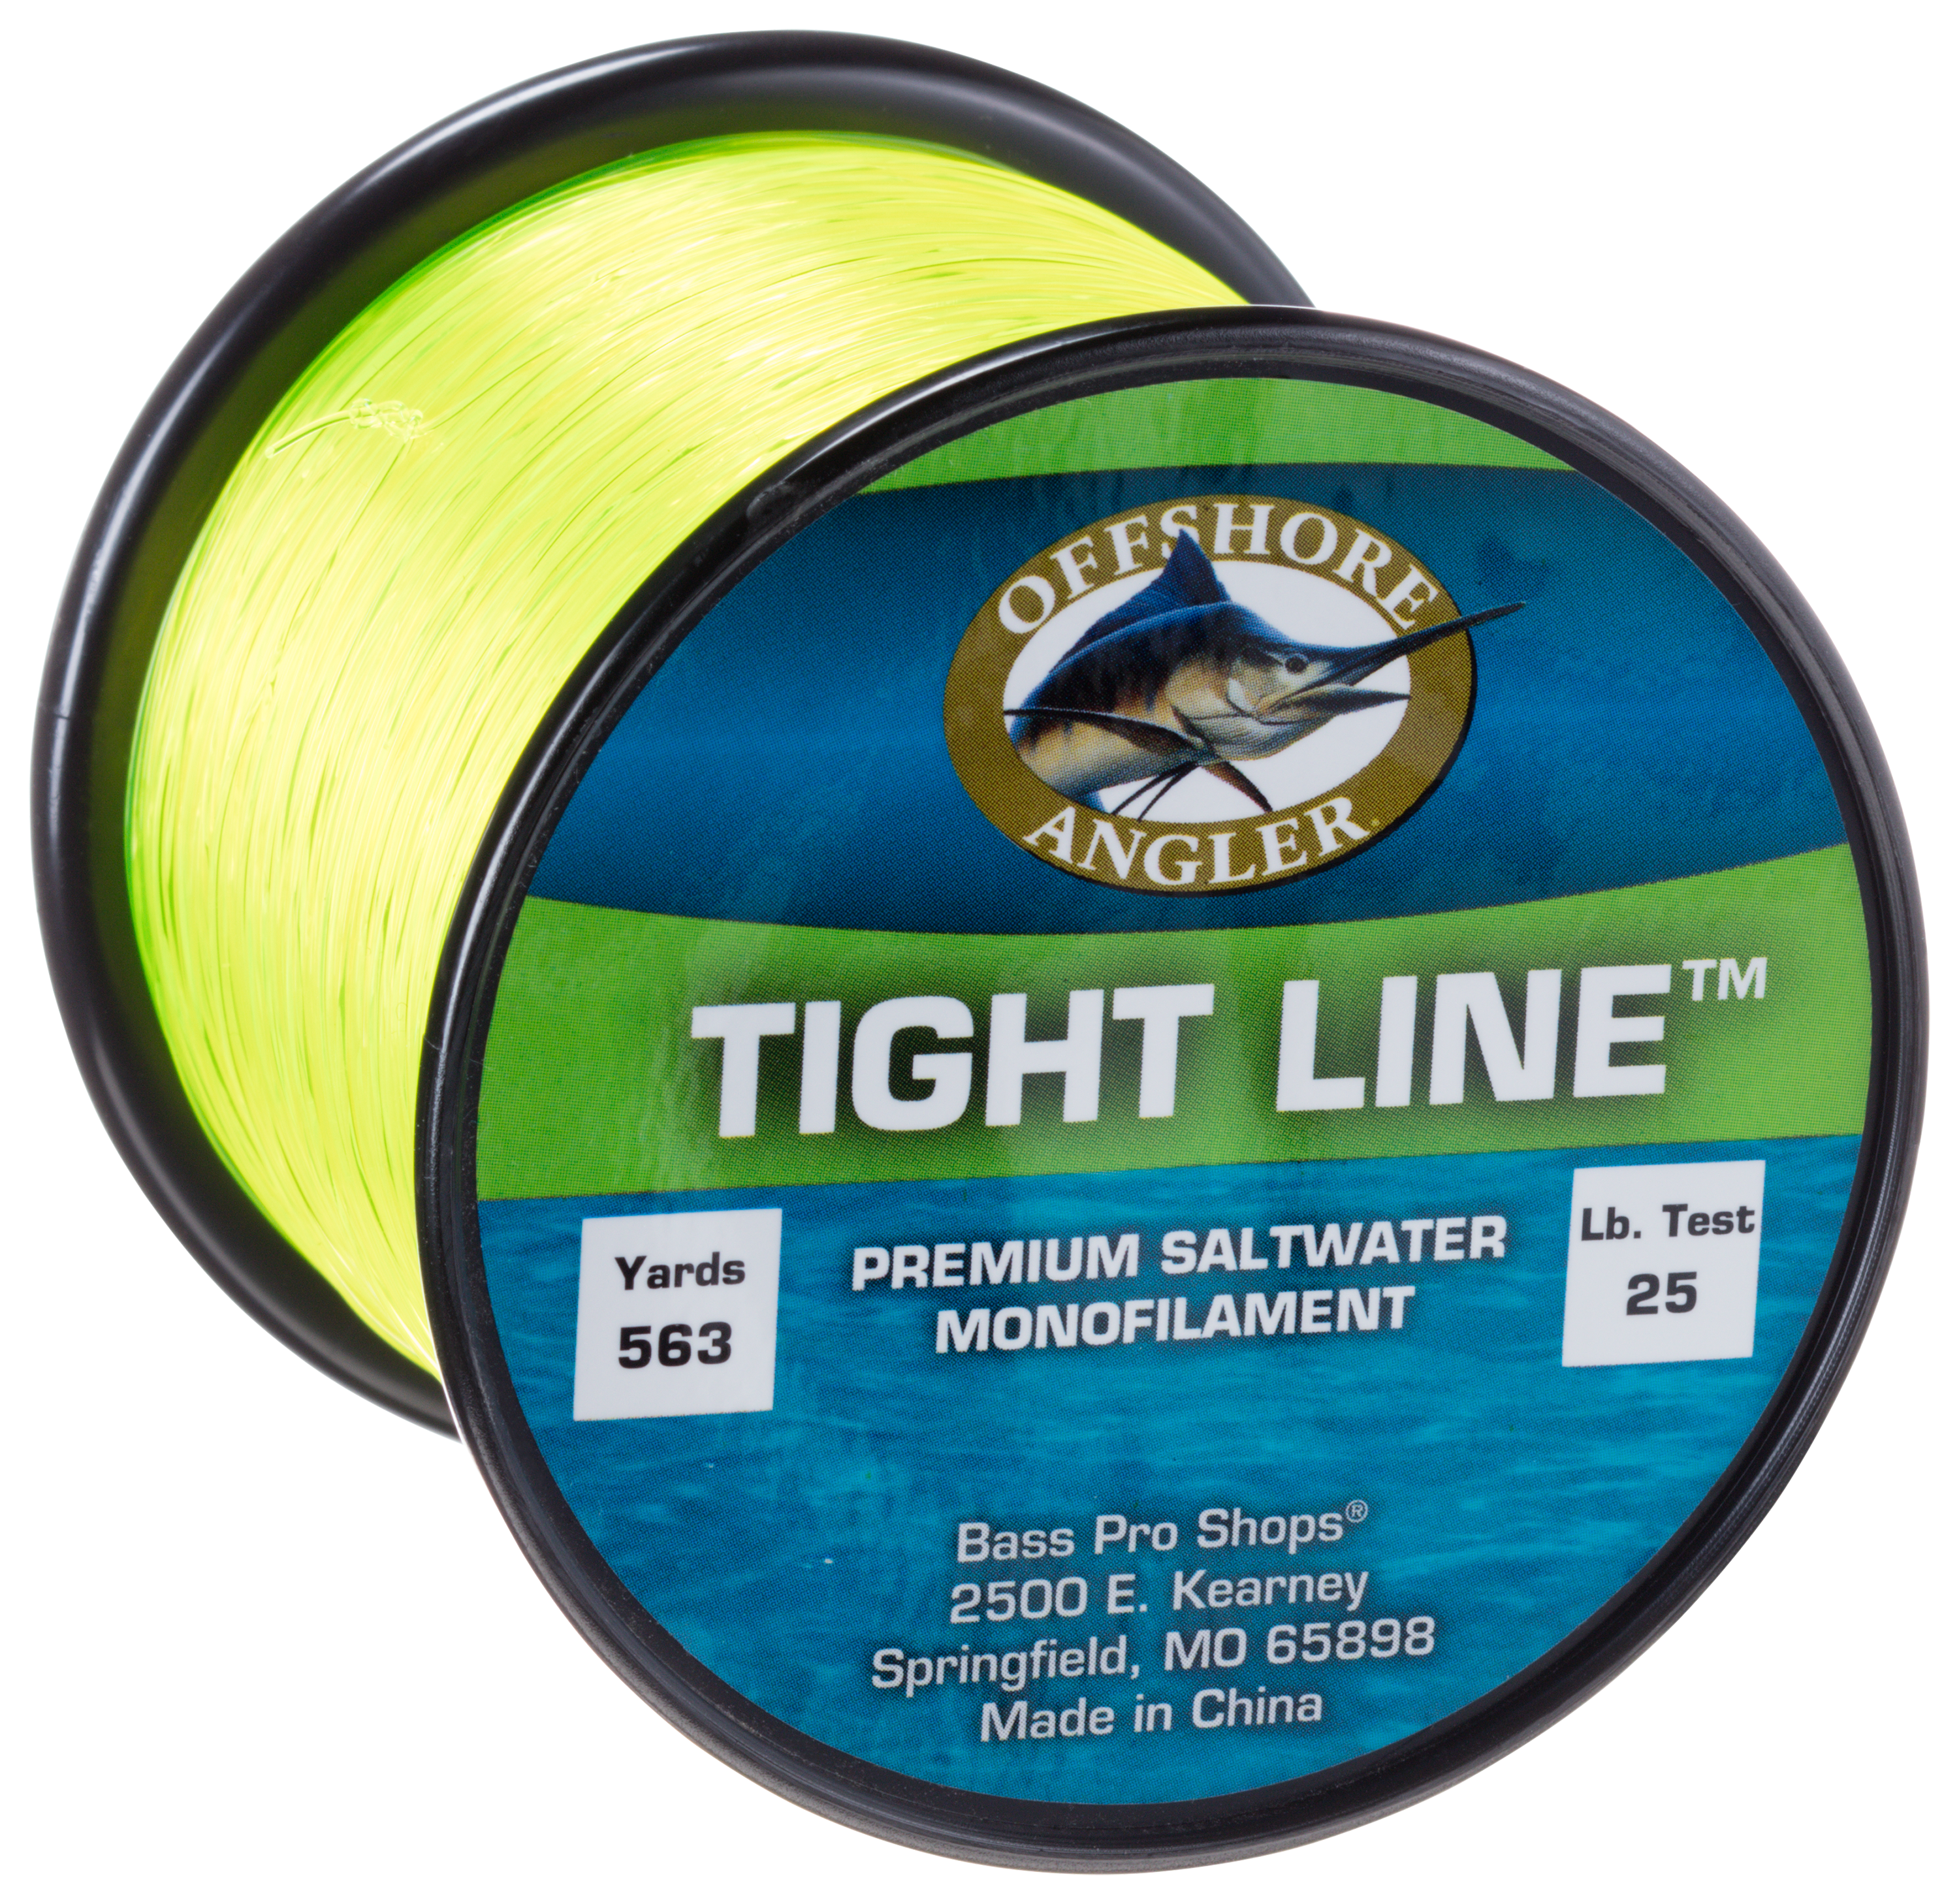 Monofilament Fishing Lines & Blue 4 lb Line Weight Fishing Leaders